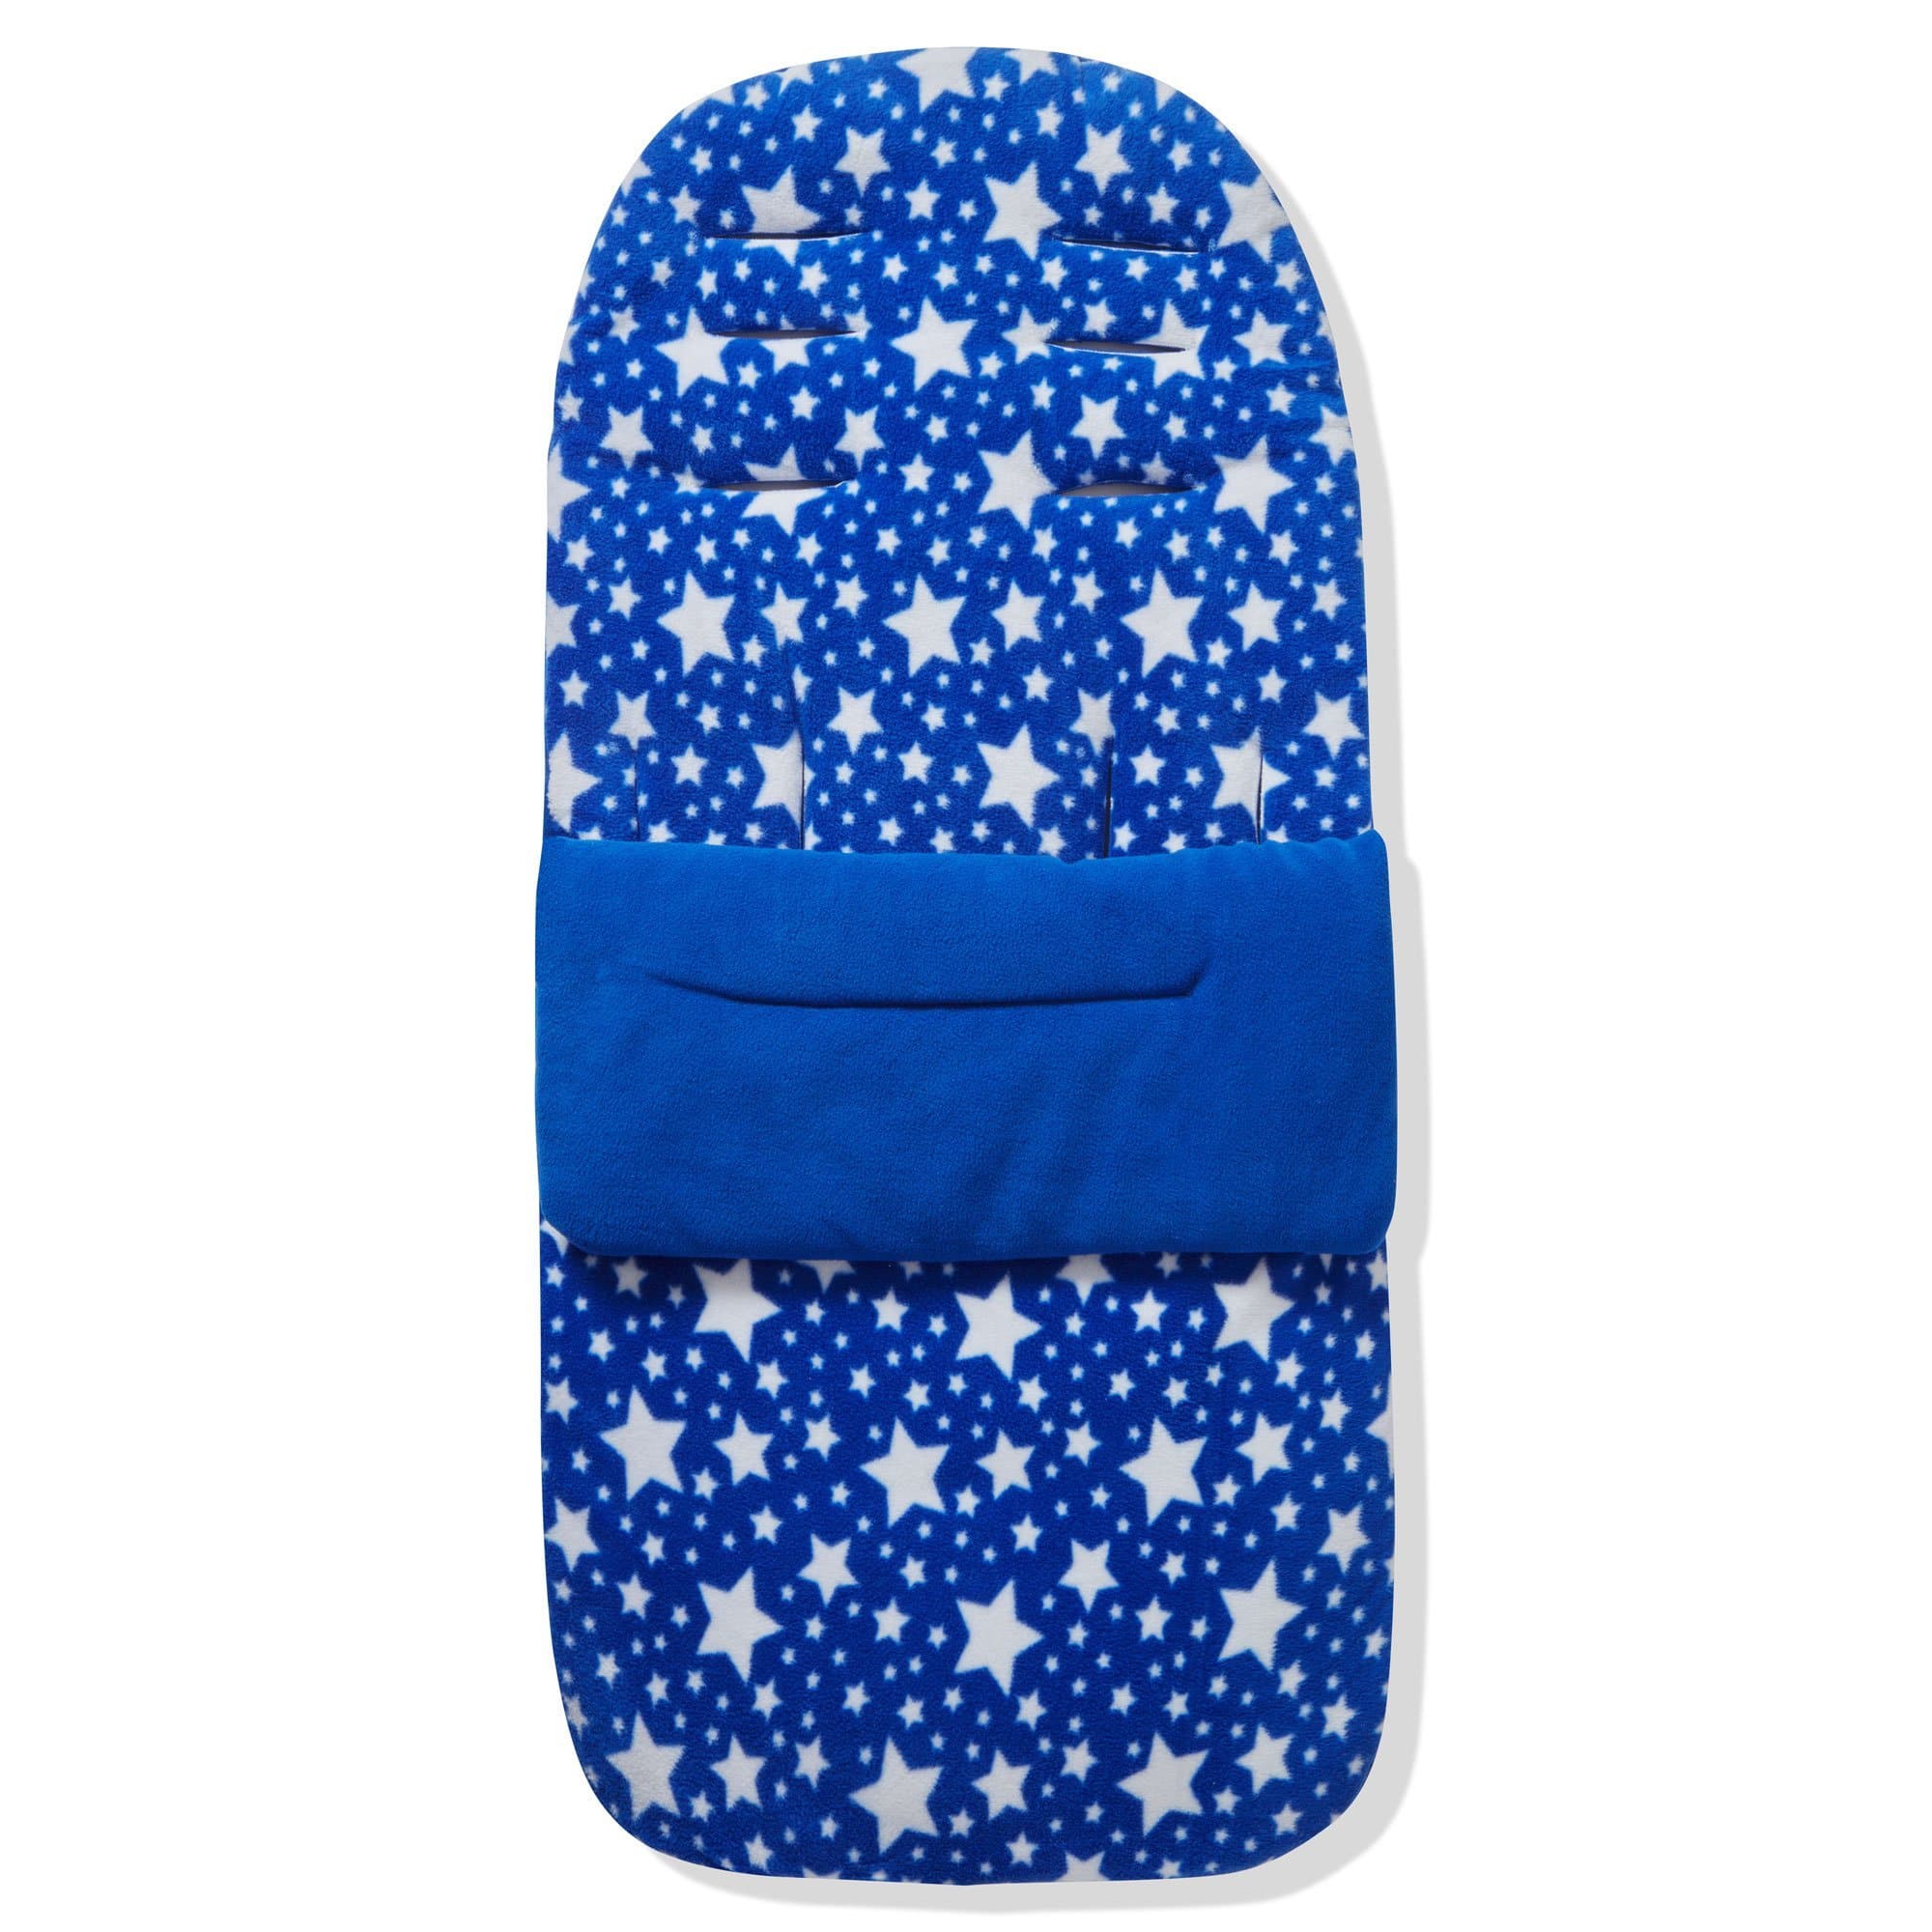 Fleece Footmuff / Cosy Toes Compatible with Diono - For Your Little One